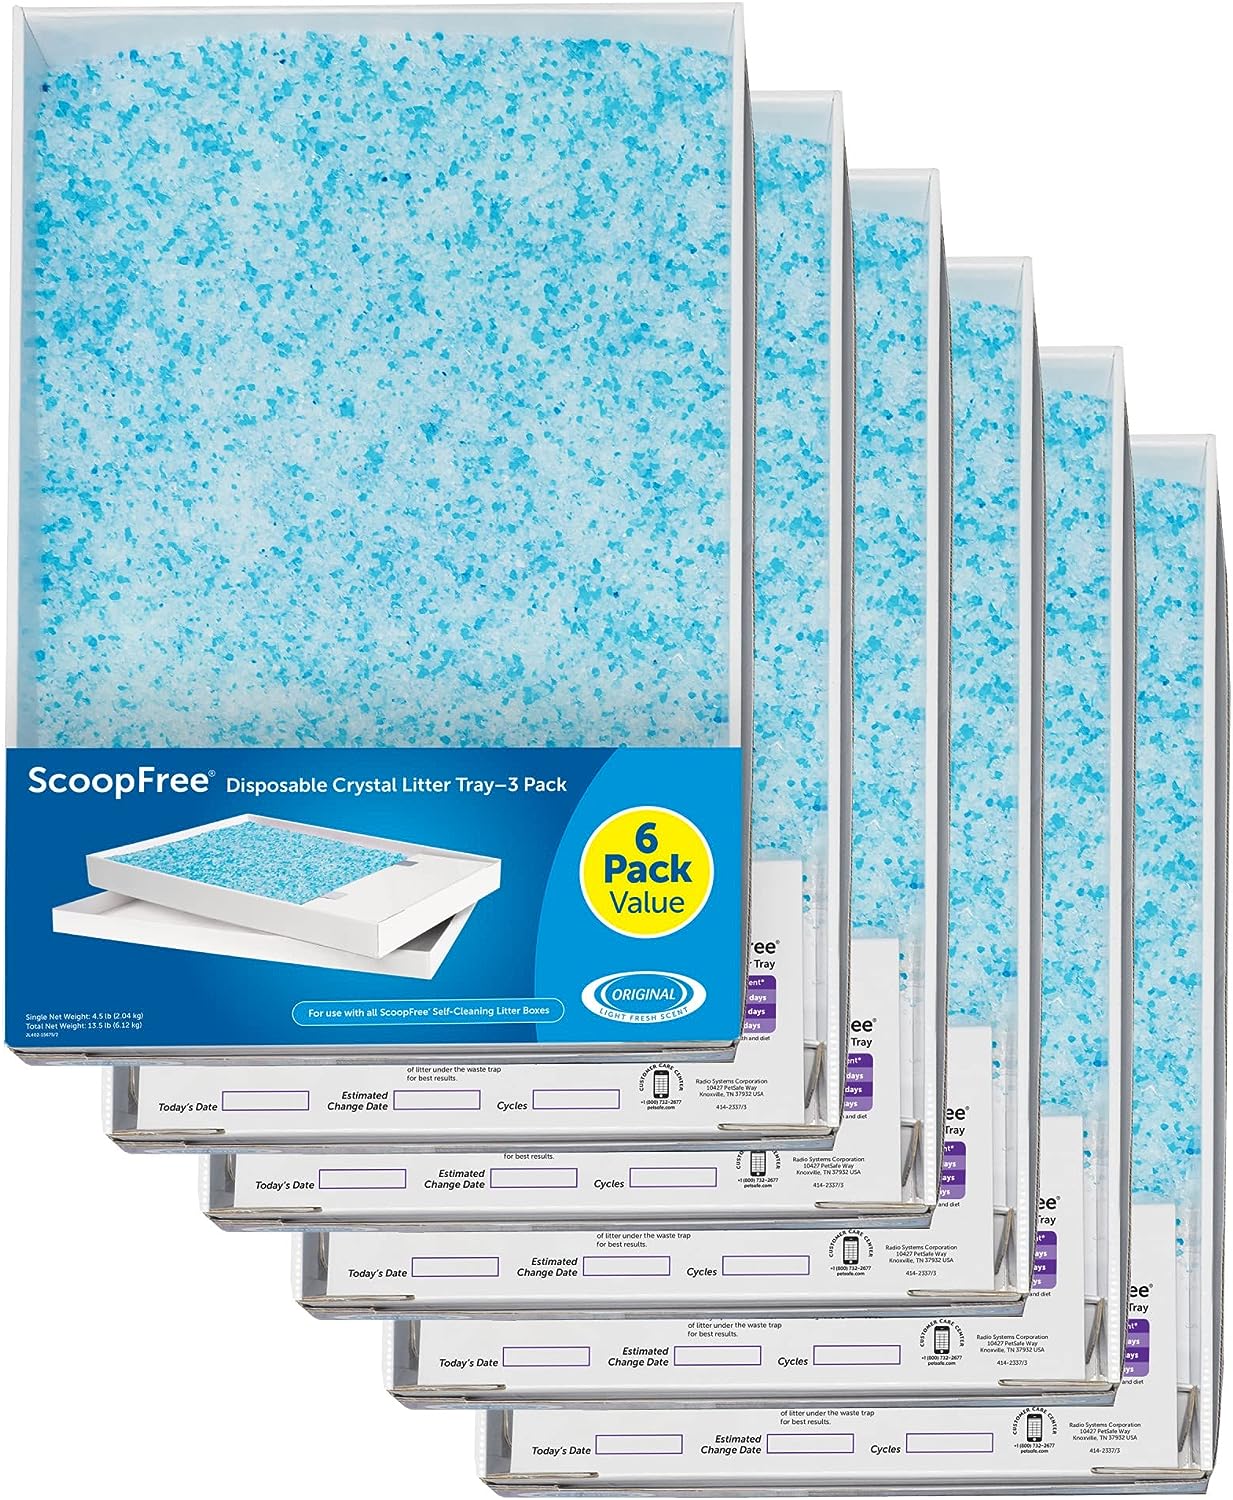 PetSafe ScoopFree Crystal Litter Tray Refills – Premium Blue Crystals, 6-Pack – Disposable Tray – Includes Leak Protection Low Tracking Litter – Absorbs Odors on Contact